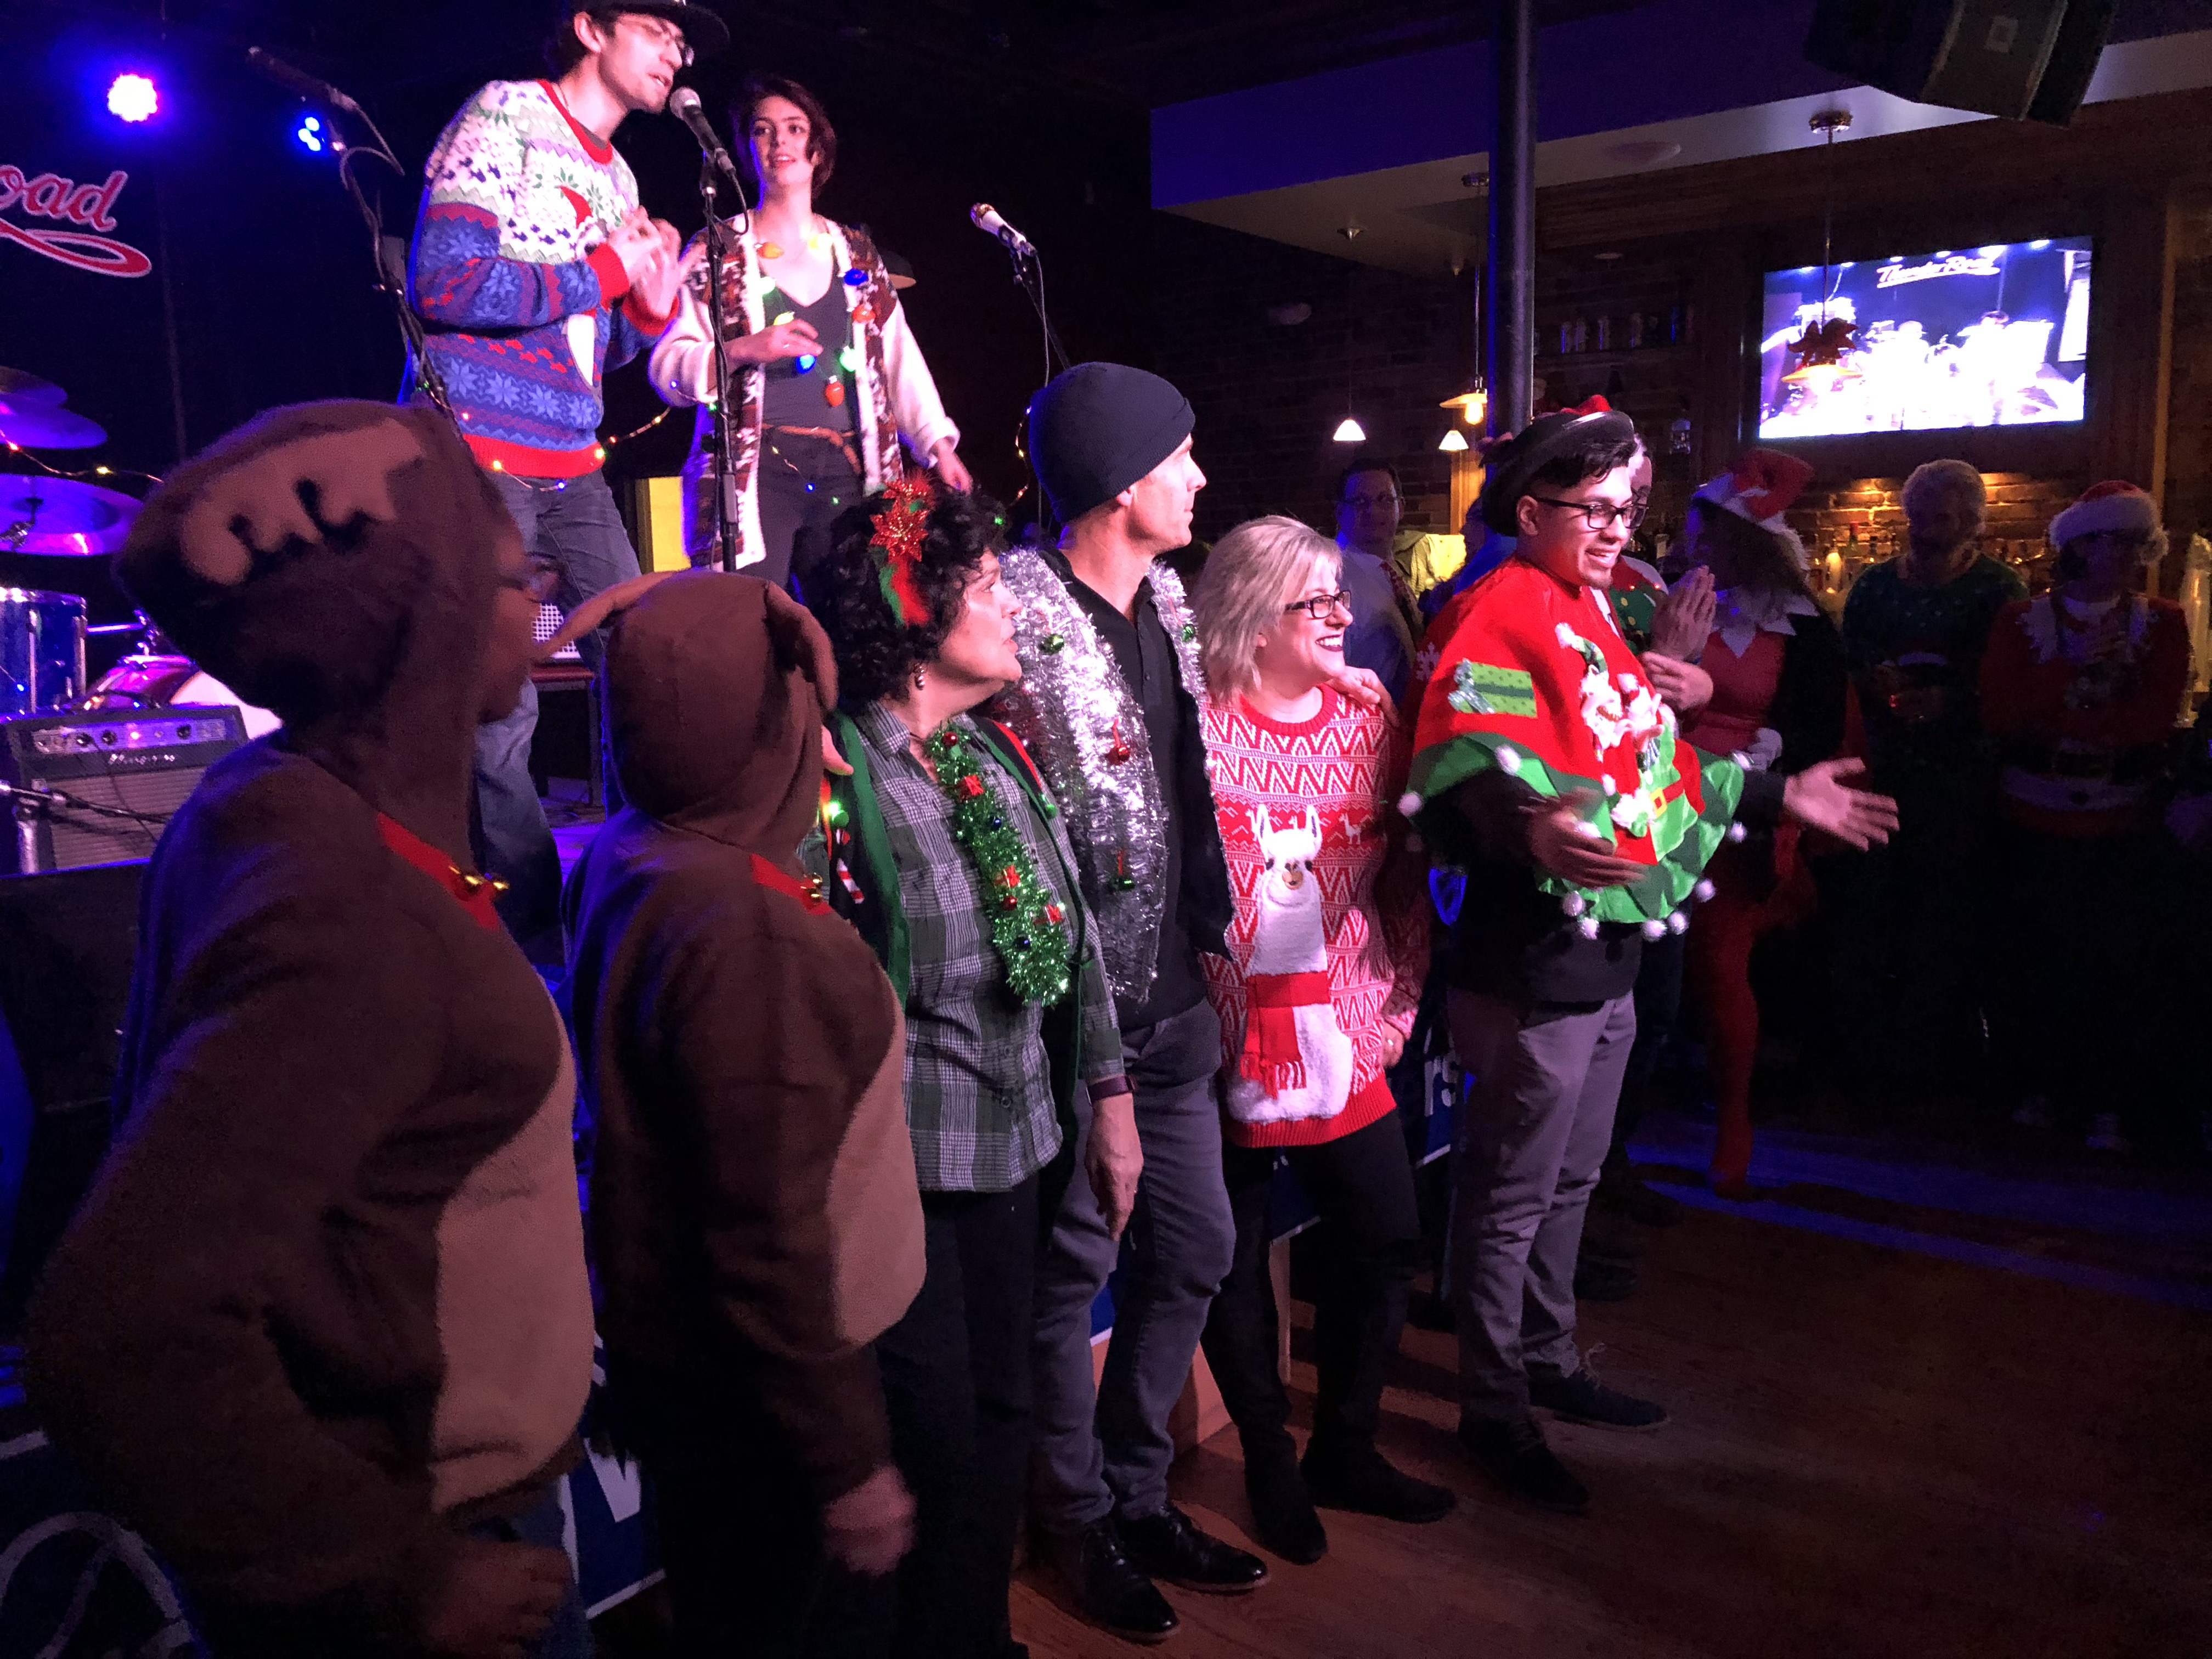 The Ugly Sweater Contestants